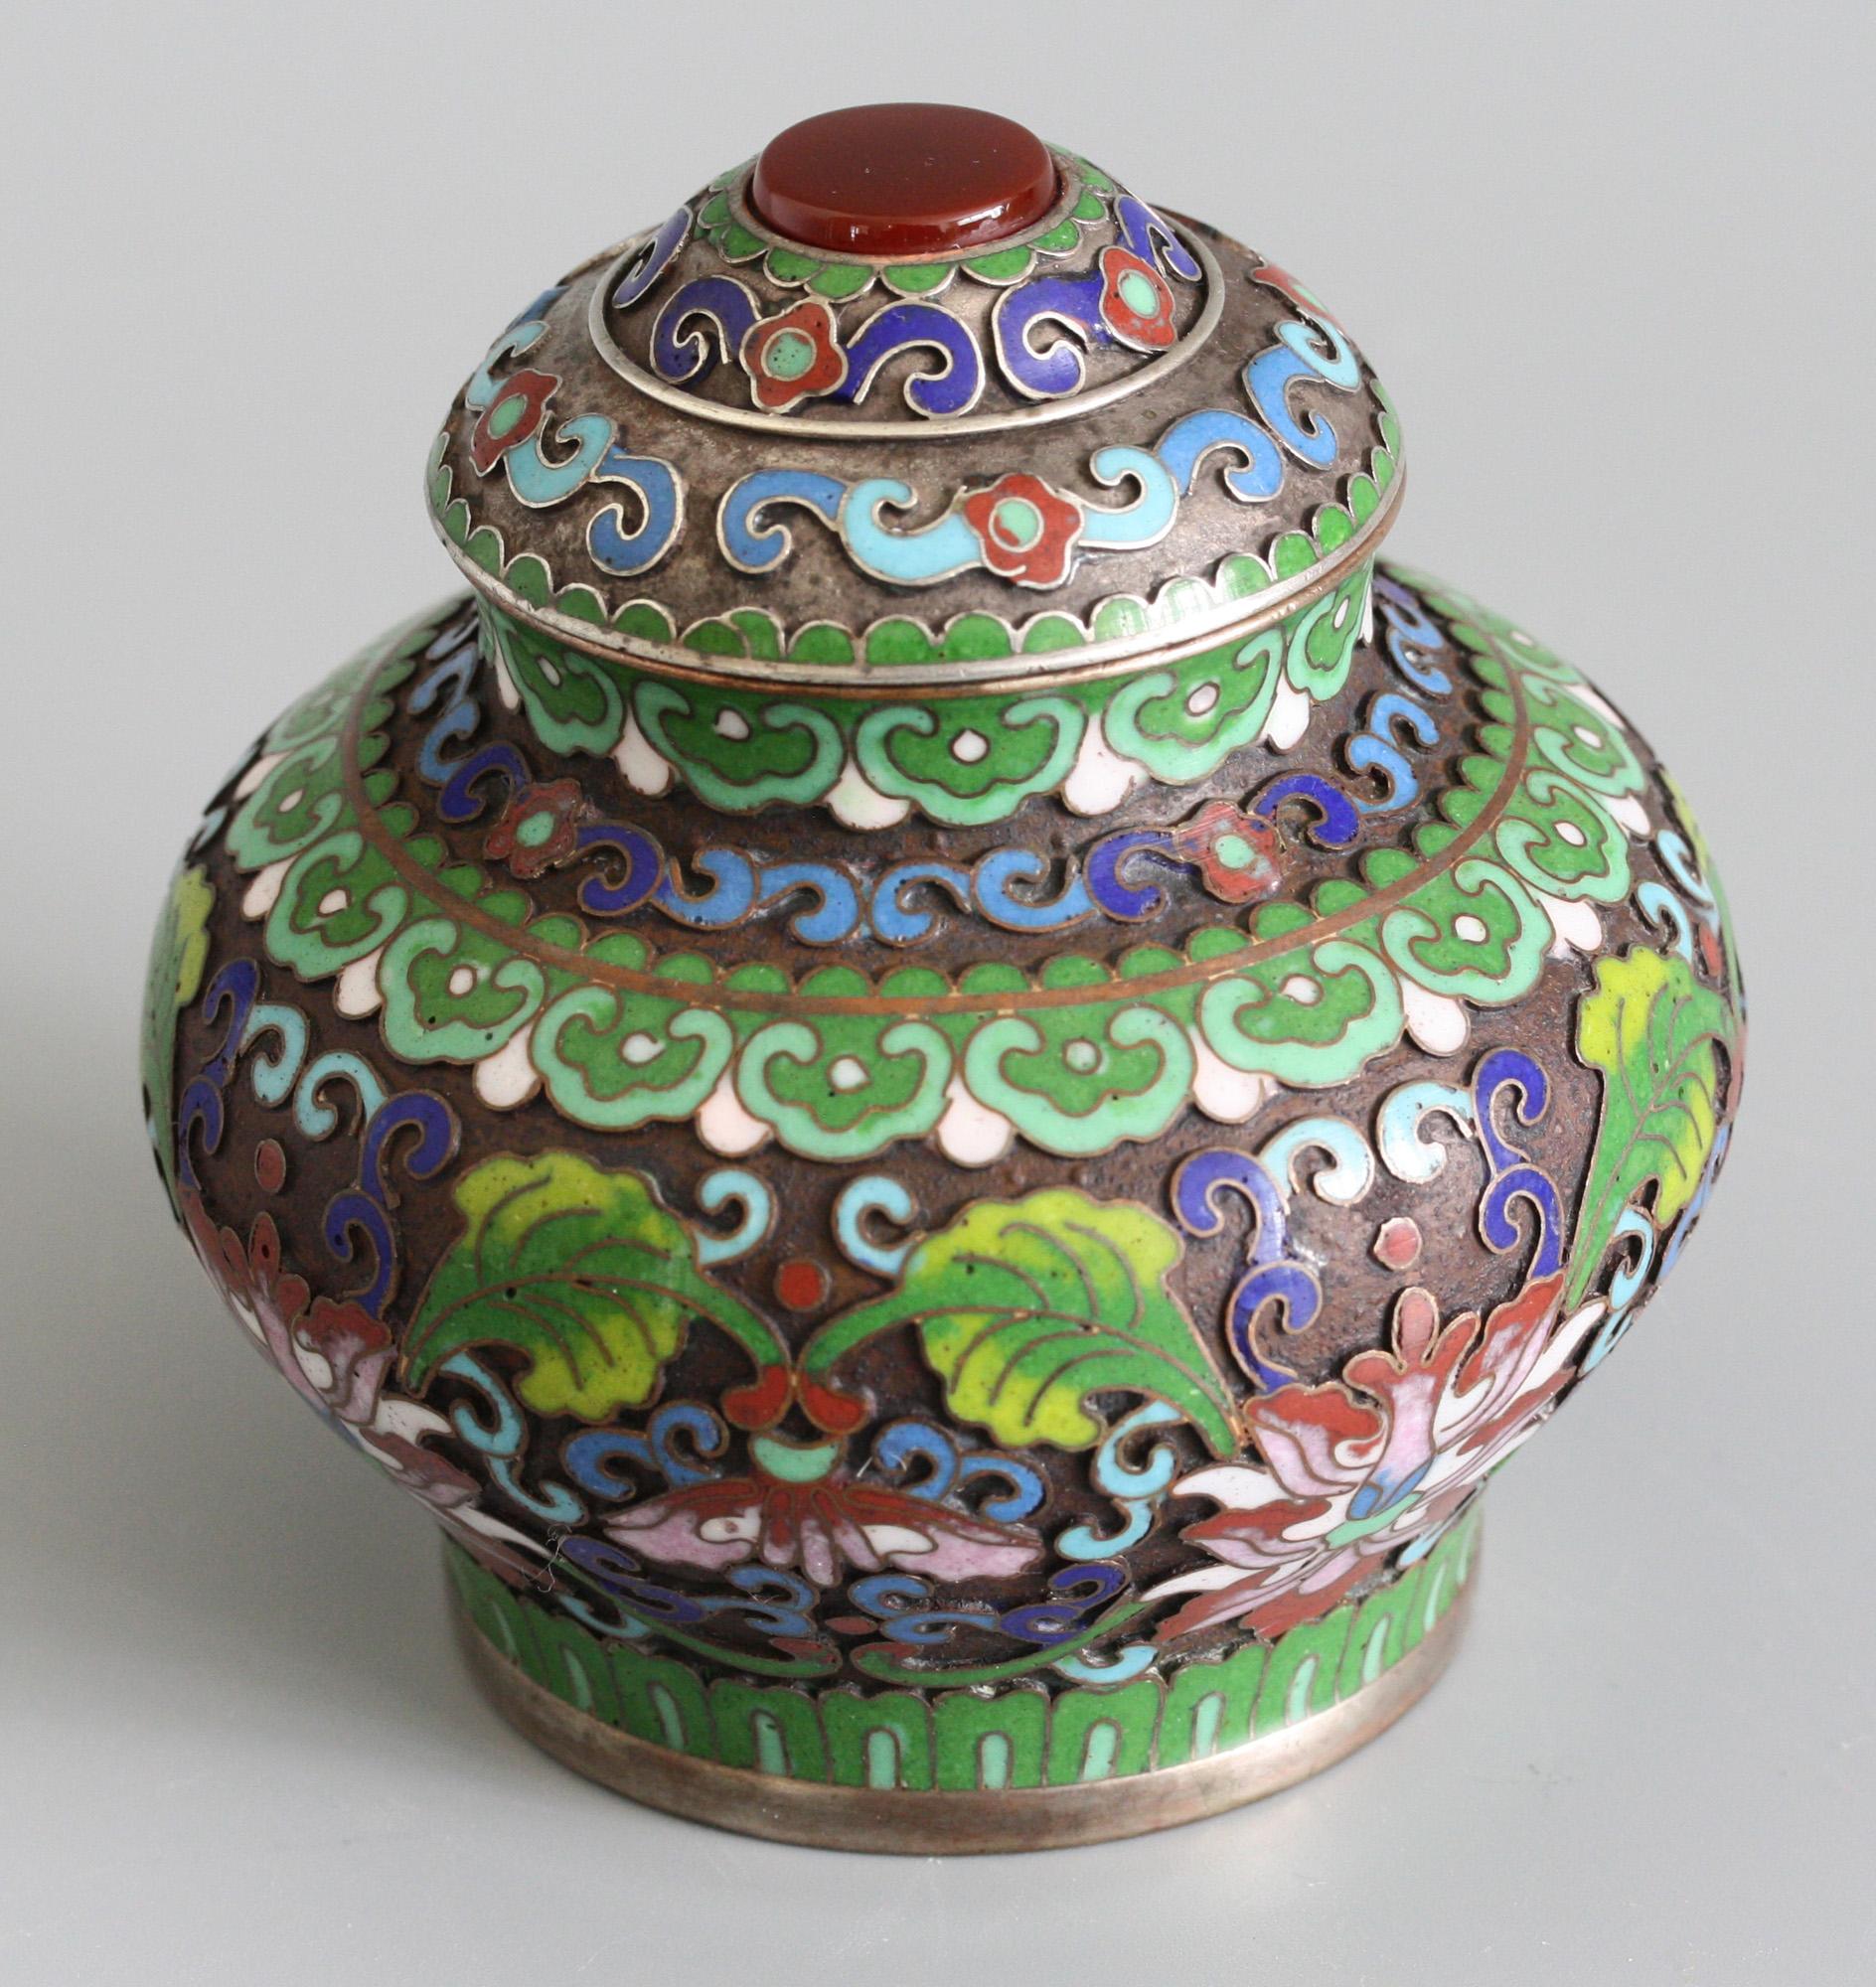 A very fine Chinese silver plated lidded cloisonne pot mounted with a polished carnelian dating from the early 20th century. This elegant pot stands on a narrow rounded base with a squat rounded body and short funnel neck with a fitted domed cover